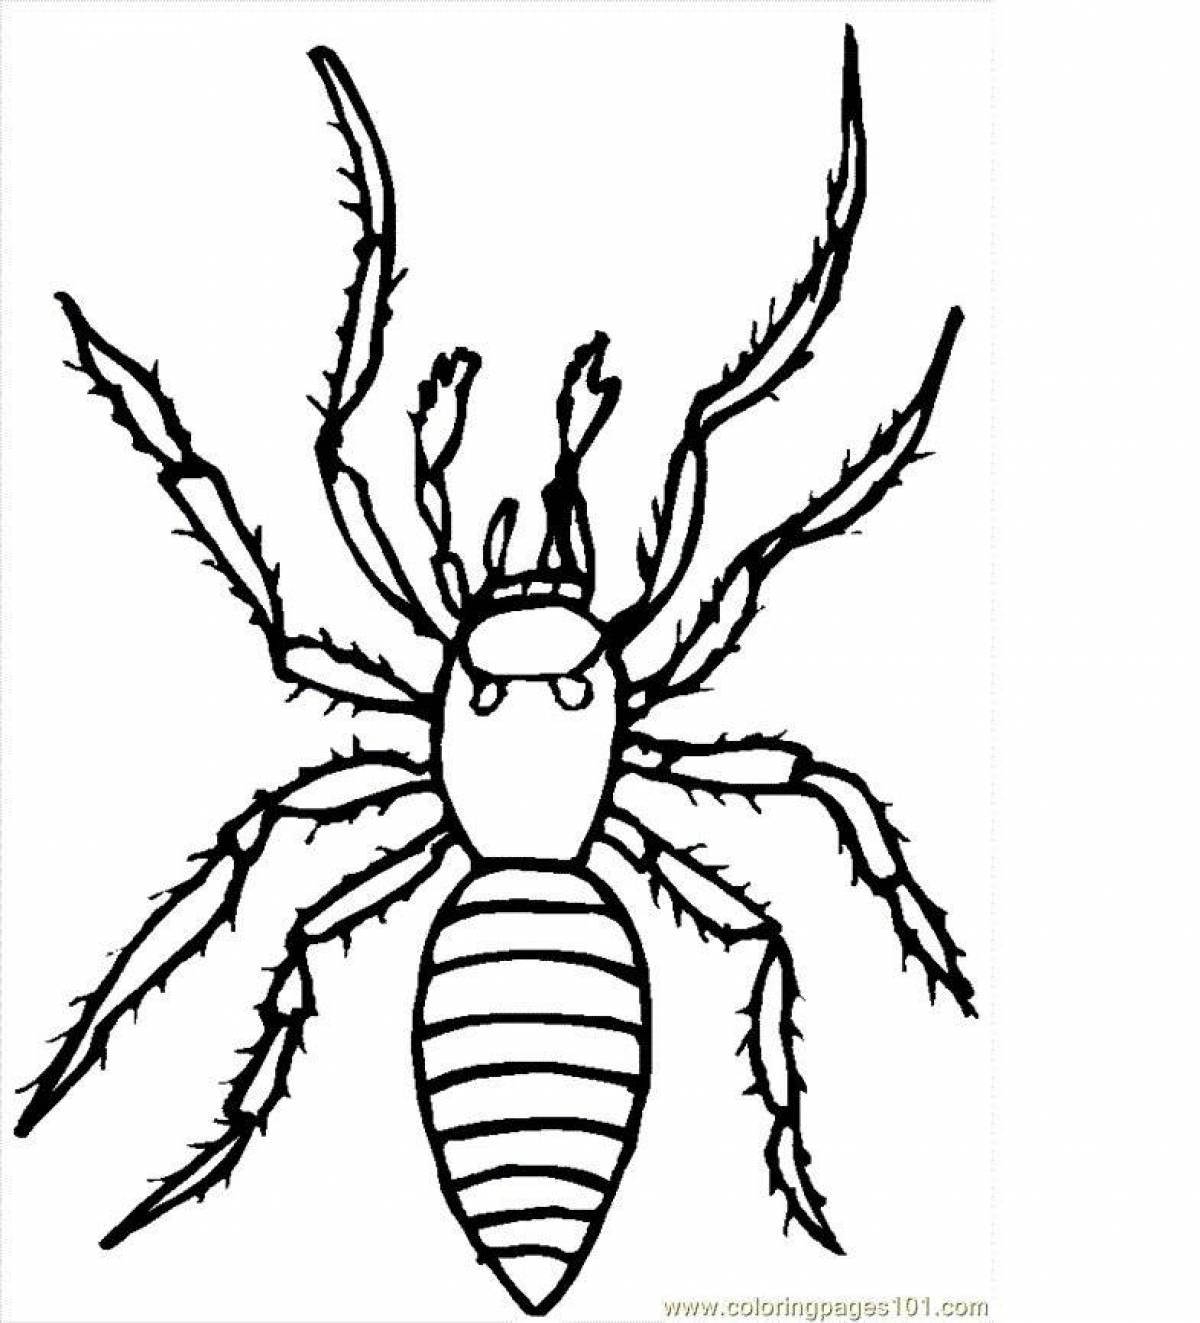 Cute spider coloring page for kids